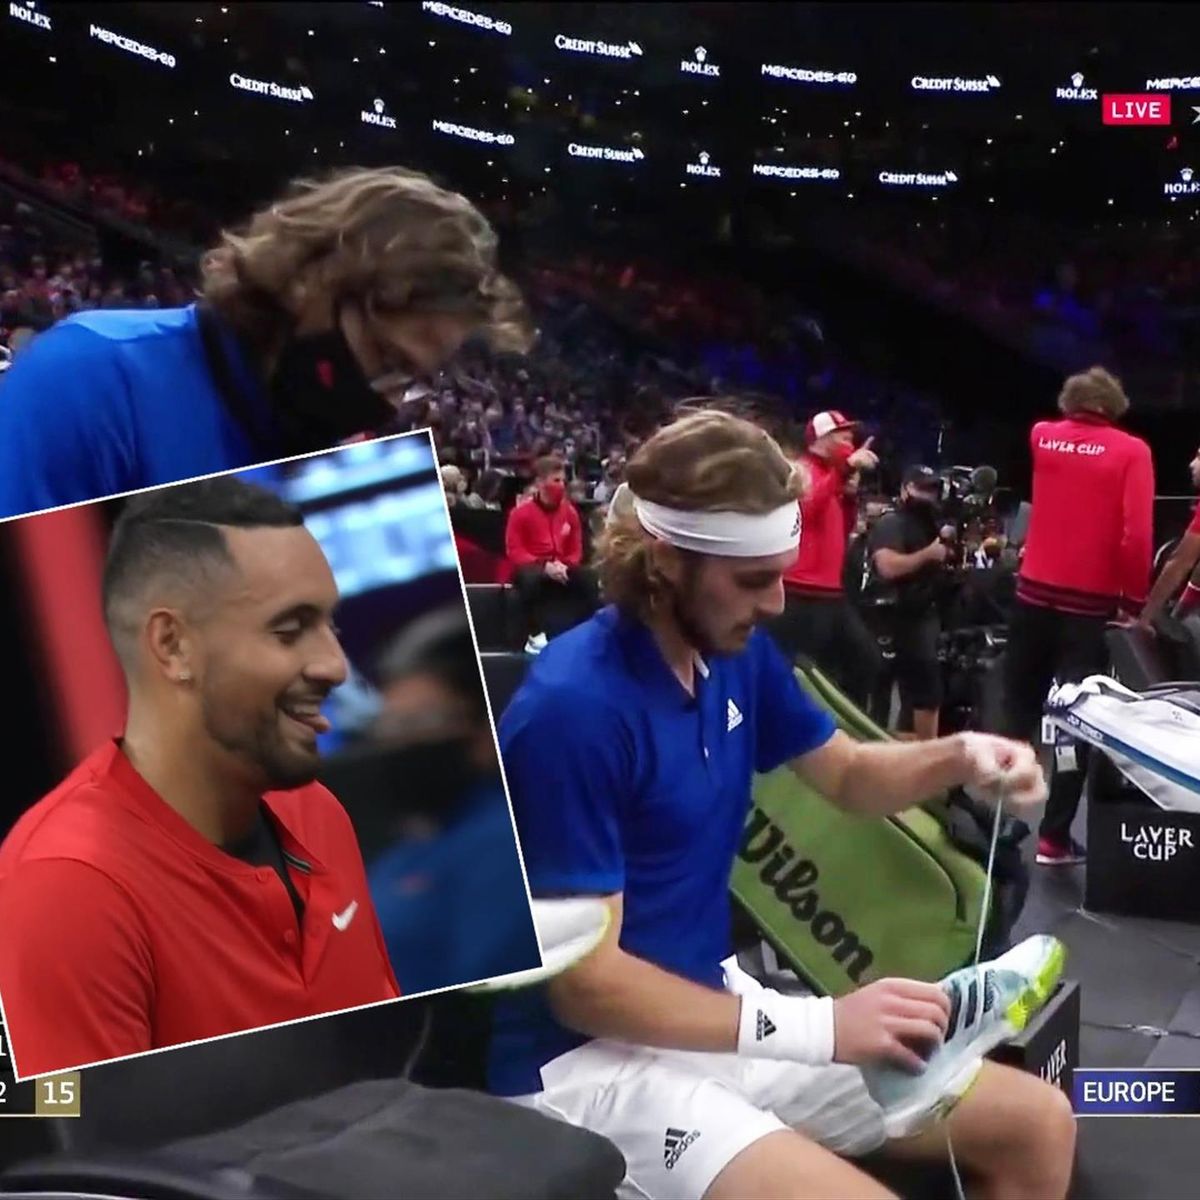 Laver Cup 2021 - Not the best advert - Stefanos Tsitsipas shoe shreds as Nick Kyrgios laughs at delay - Tennis video